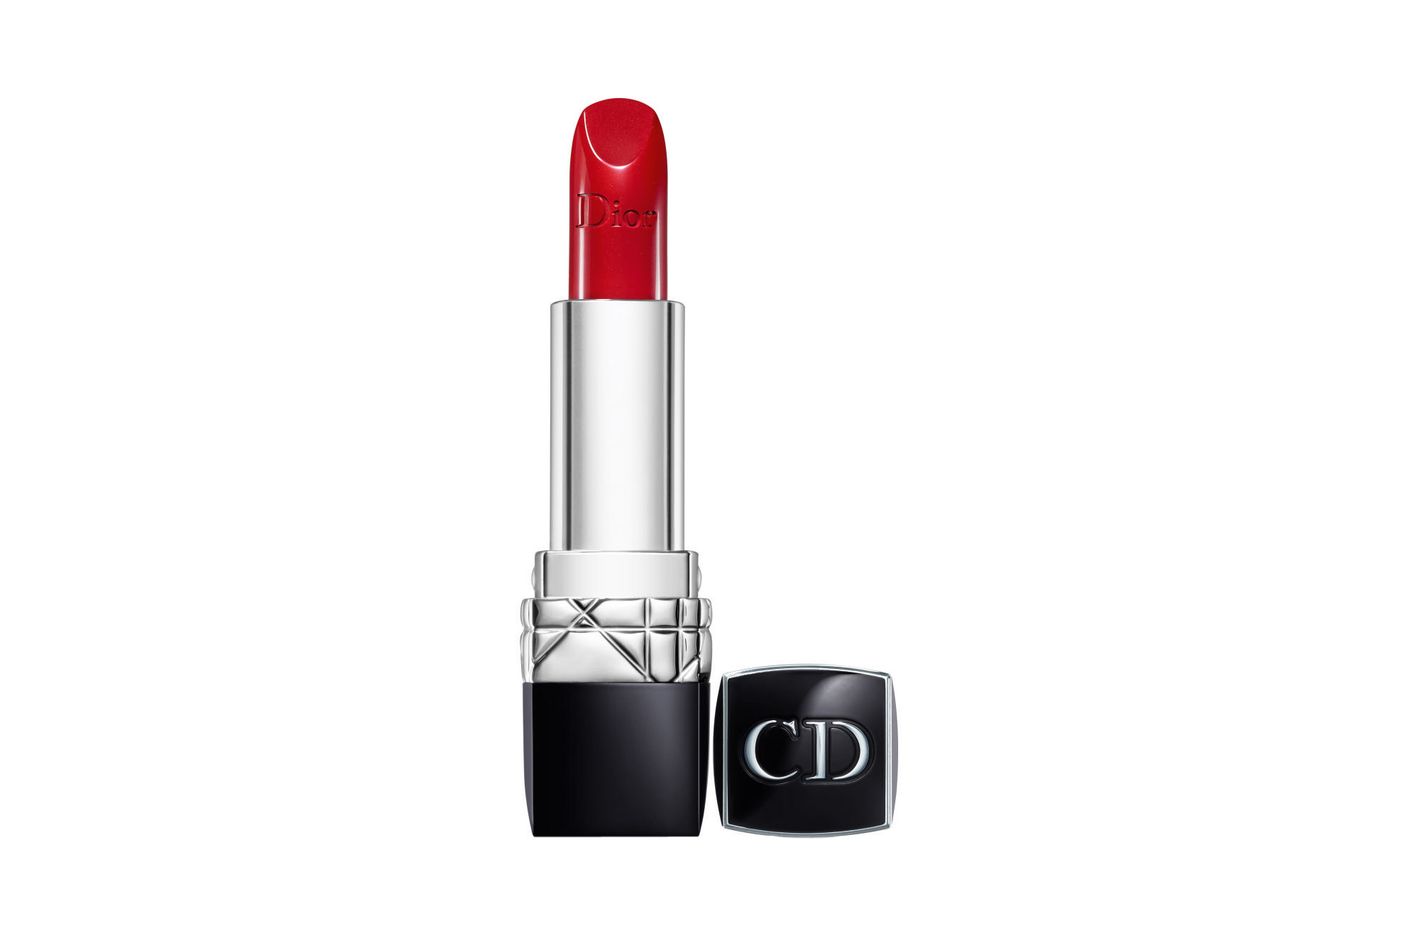 DIOR Rouge Dior Couture Colour Refillable Lipstick  MYER